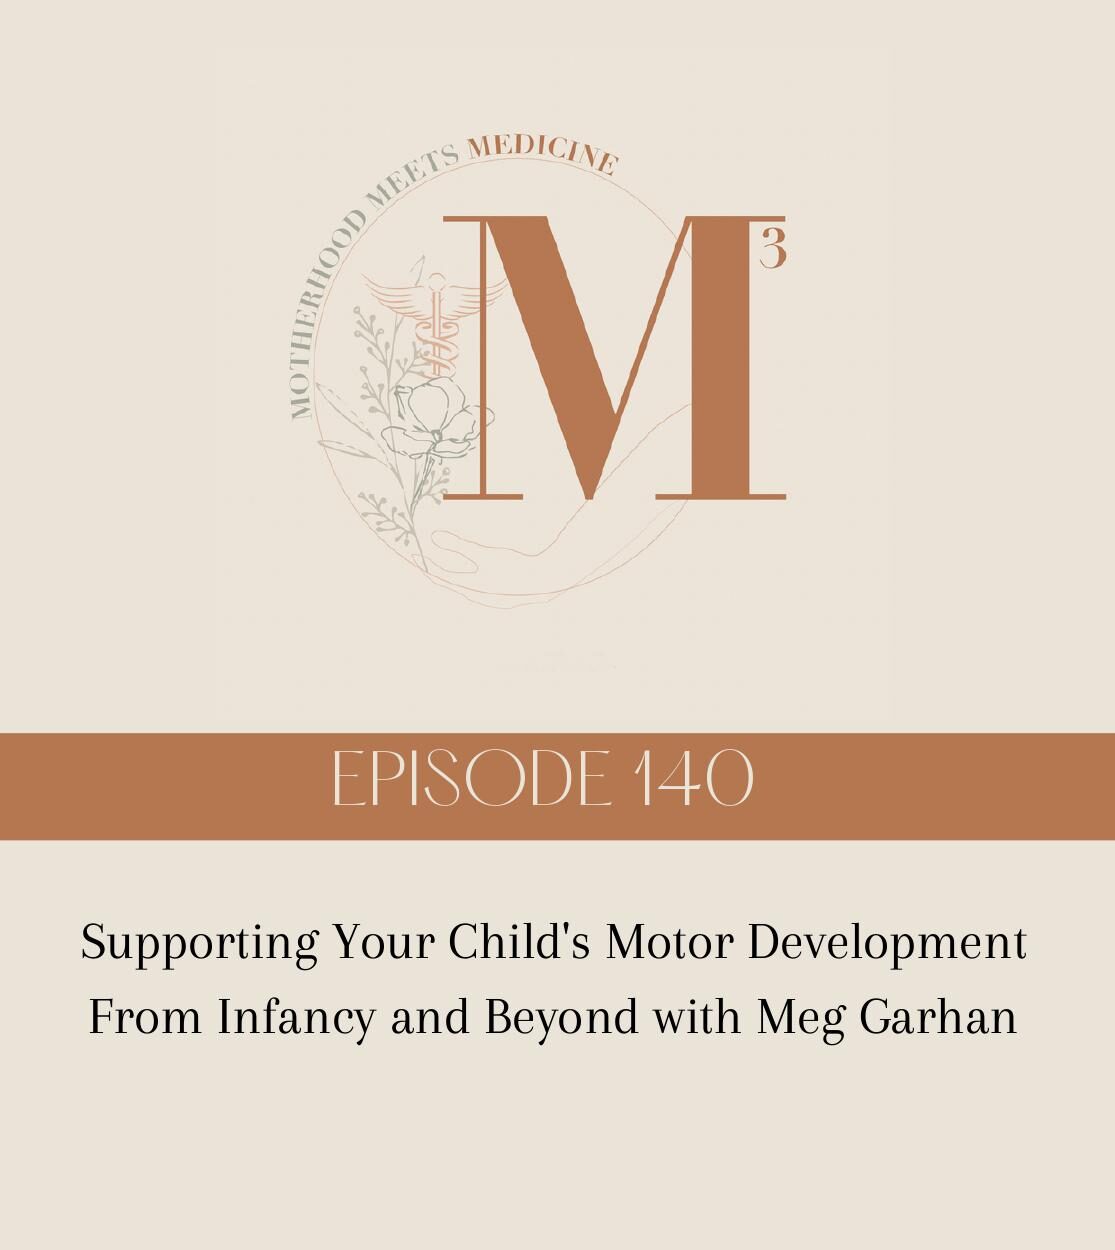 Episode 140: Supporting Your Child’s Motor Development From Infancy and Beyond with Meg Garhan